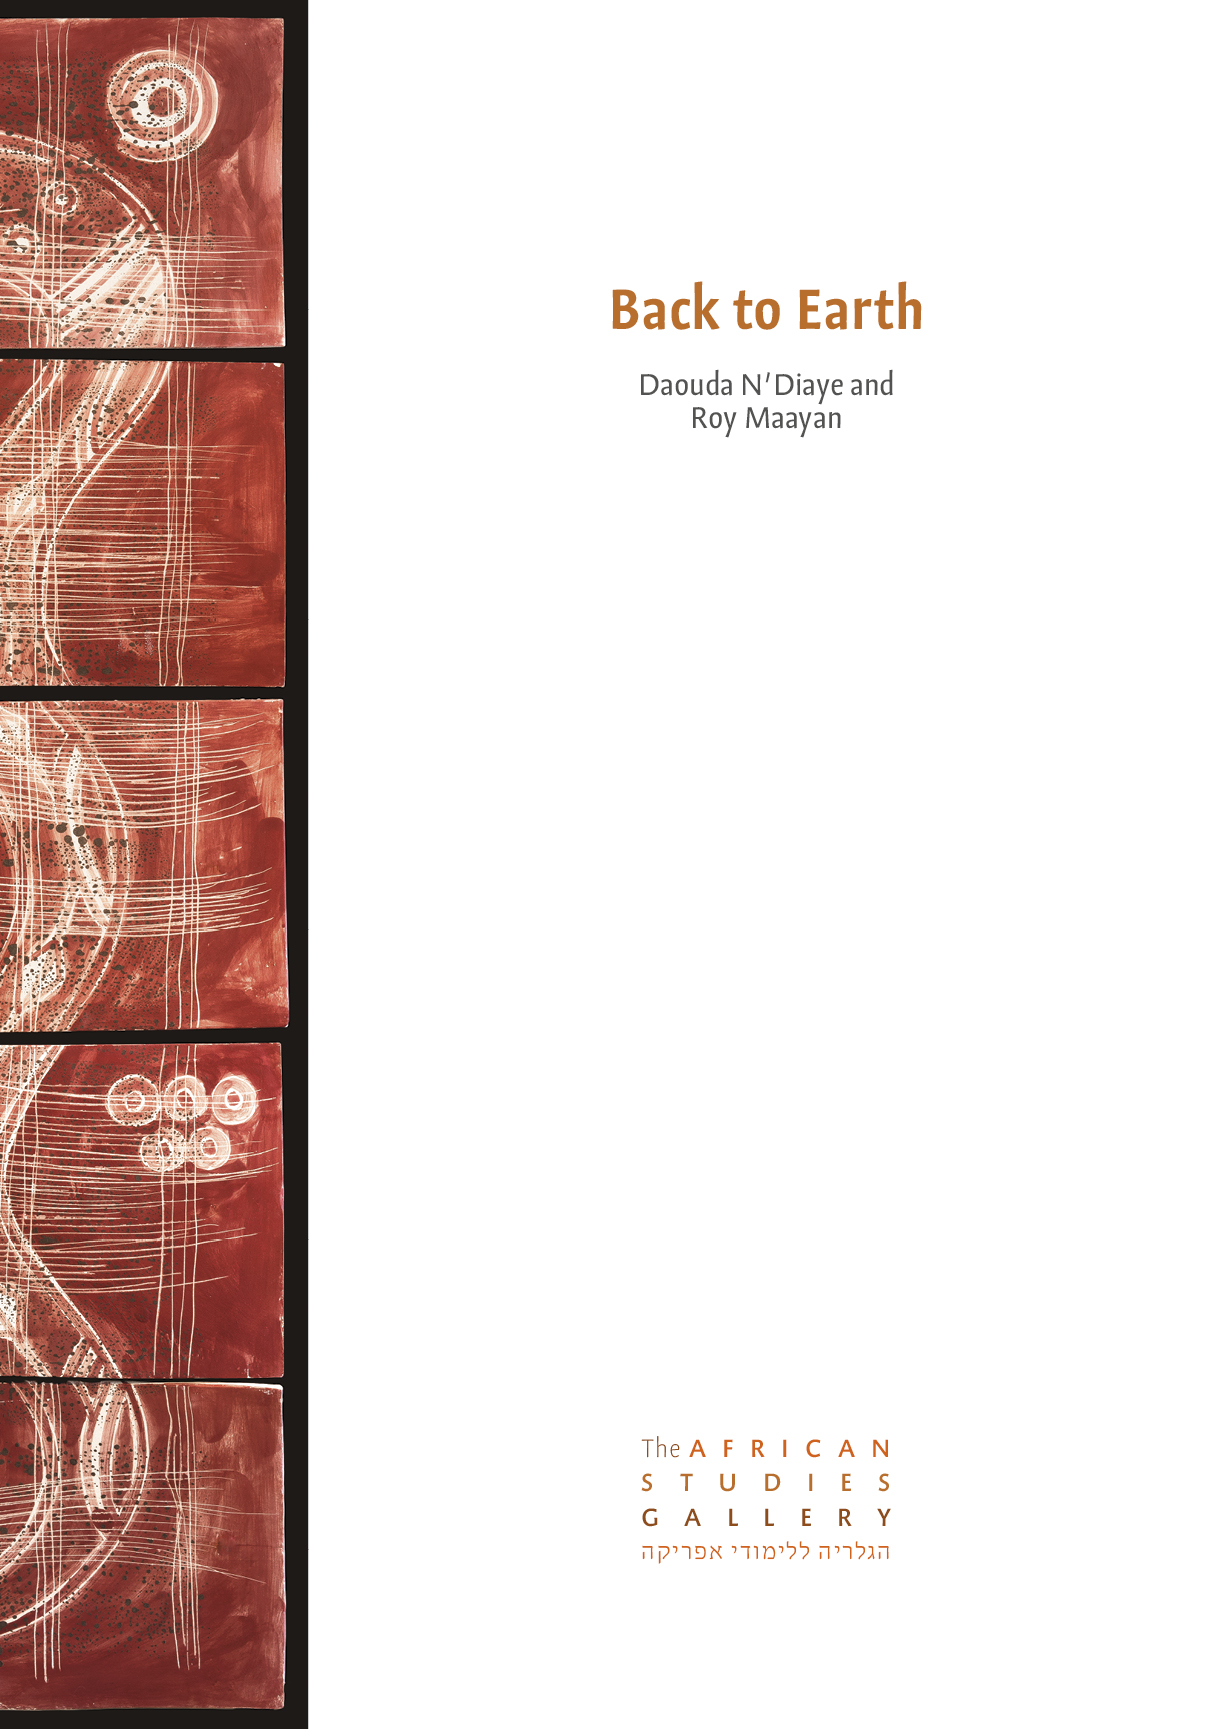 https://www.africanstudiesgallery.org/catalogues/8-back-to-earth.pdf